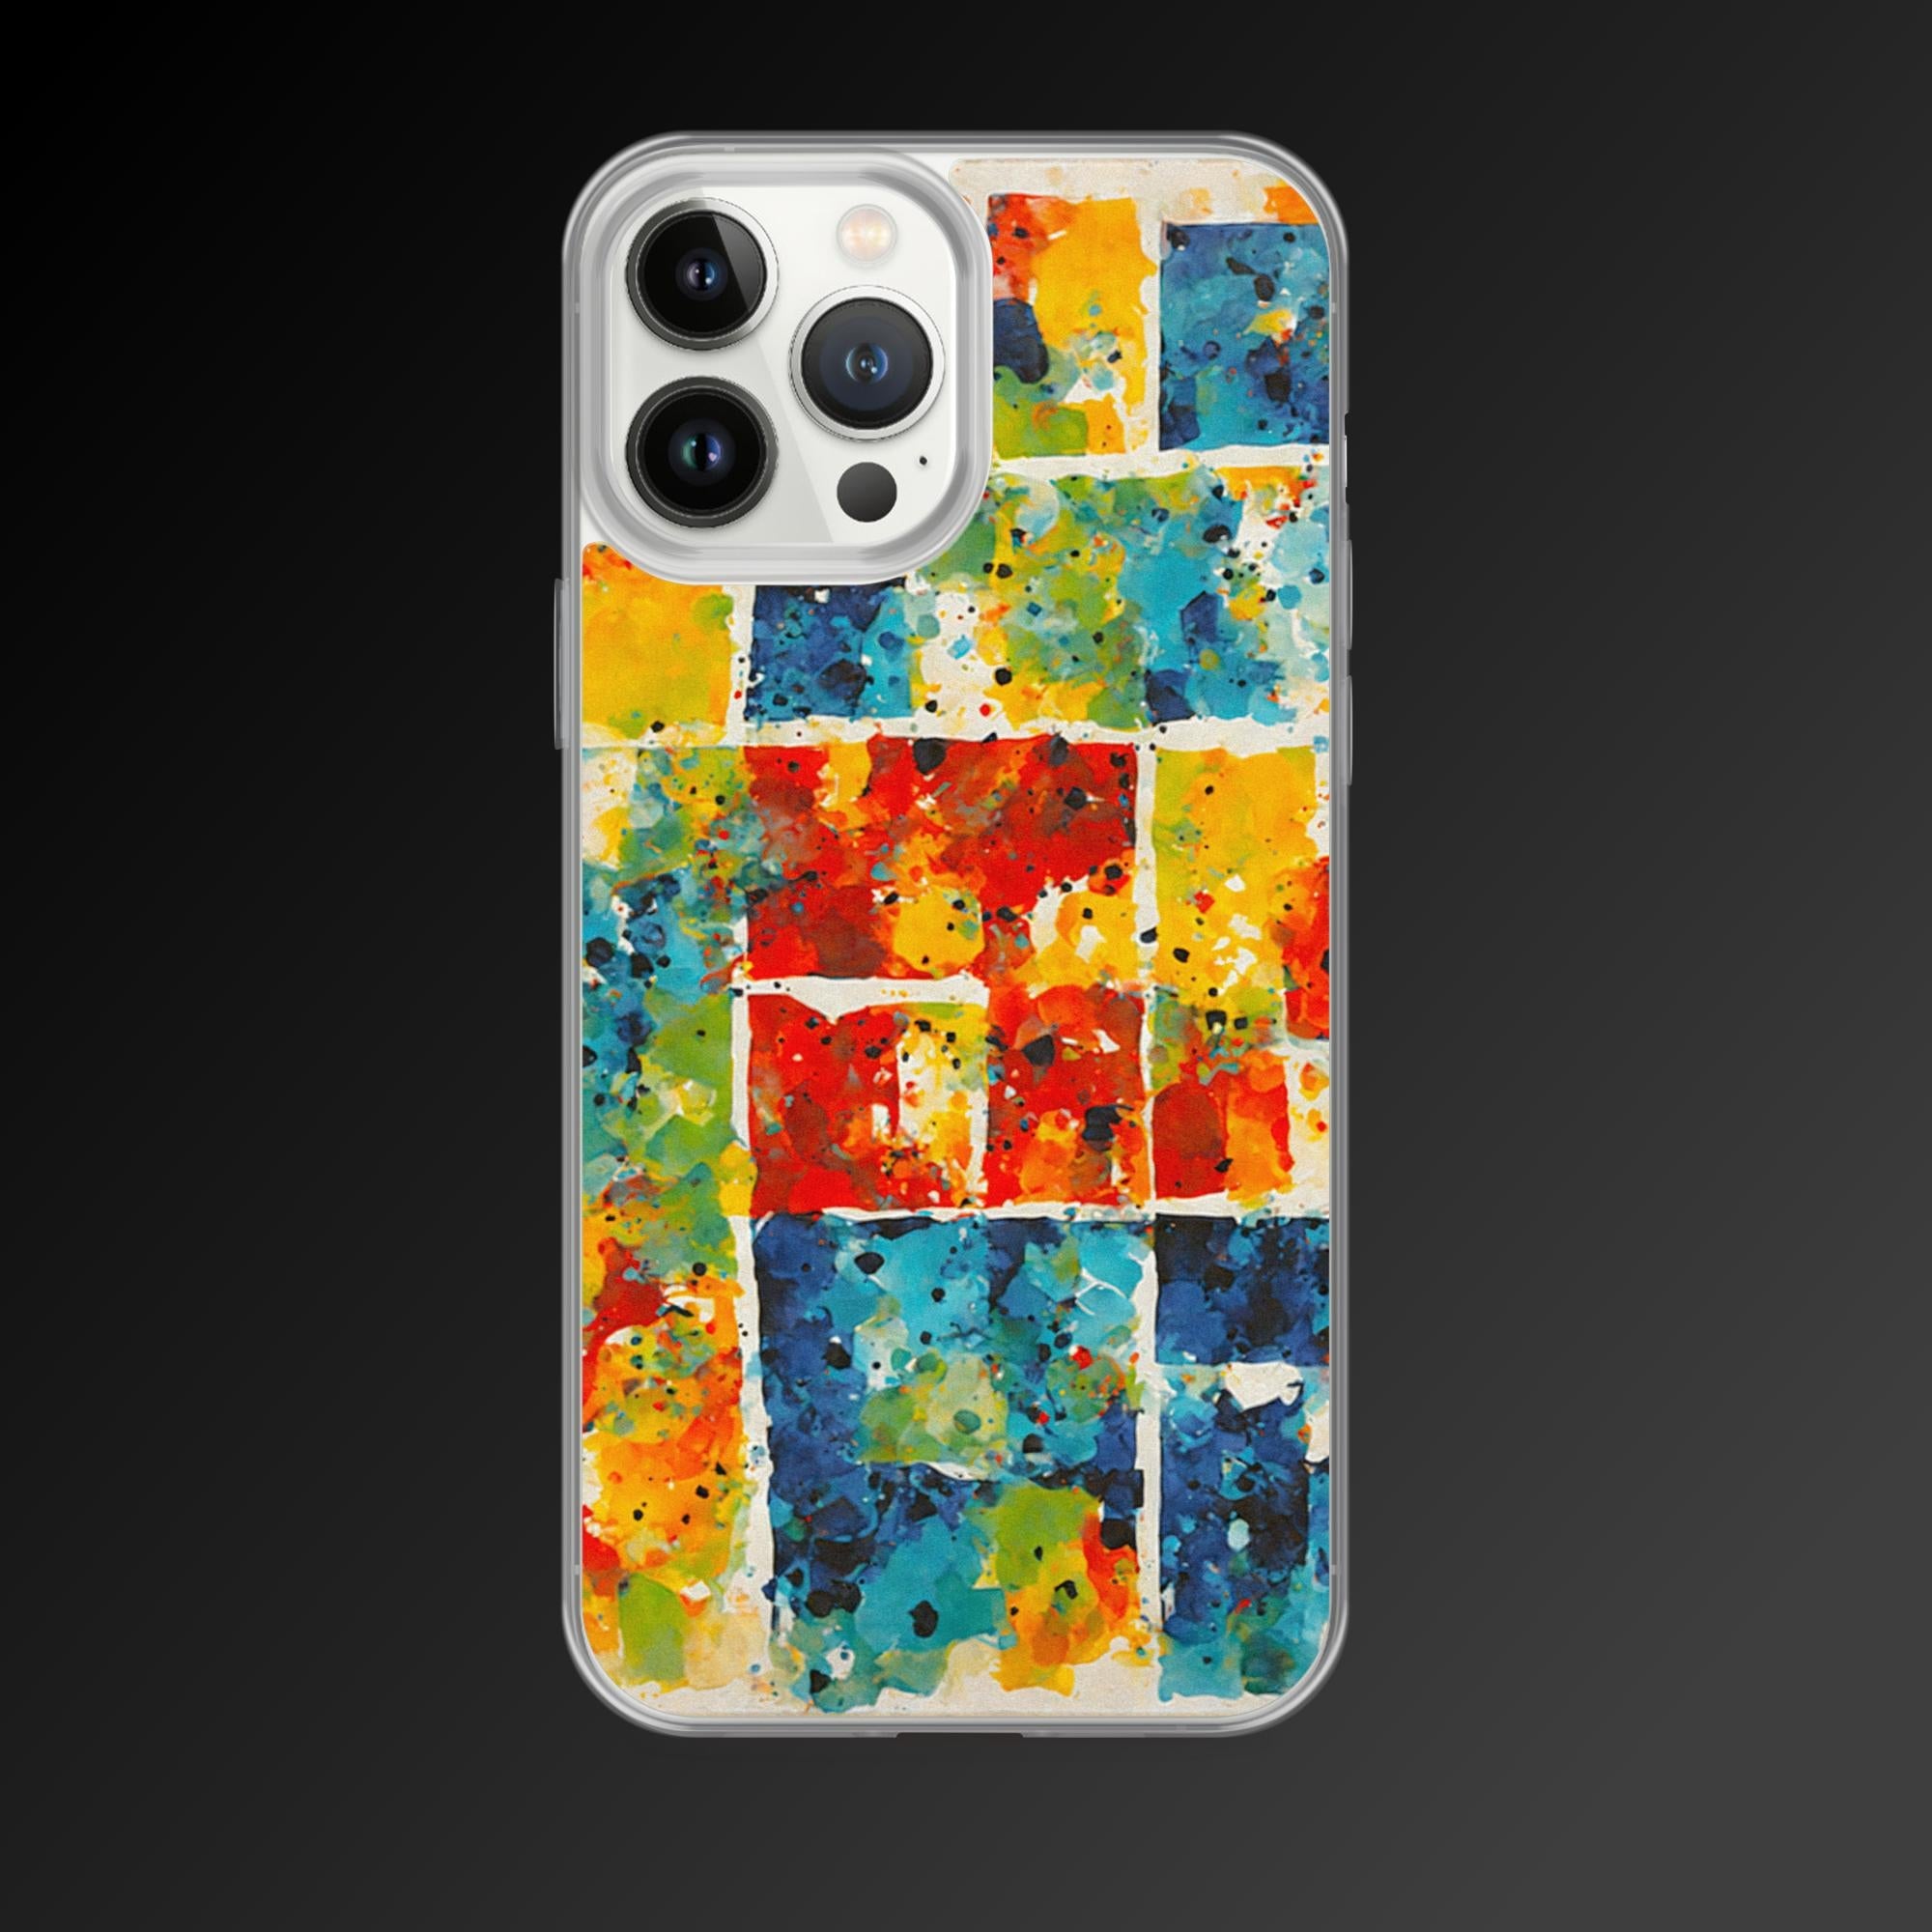 "Sentimental balance" clear iphone case - Clear iphone case - Ever colorful